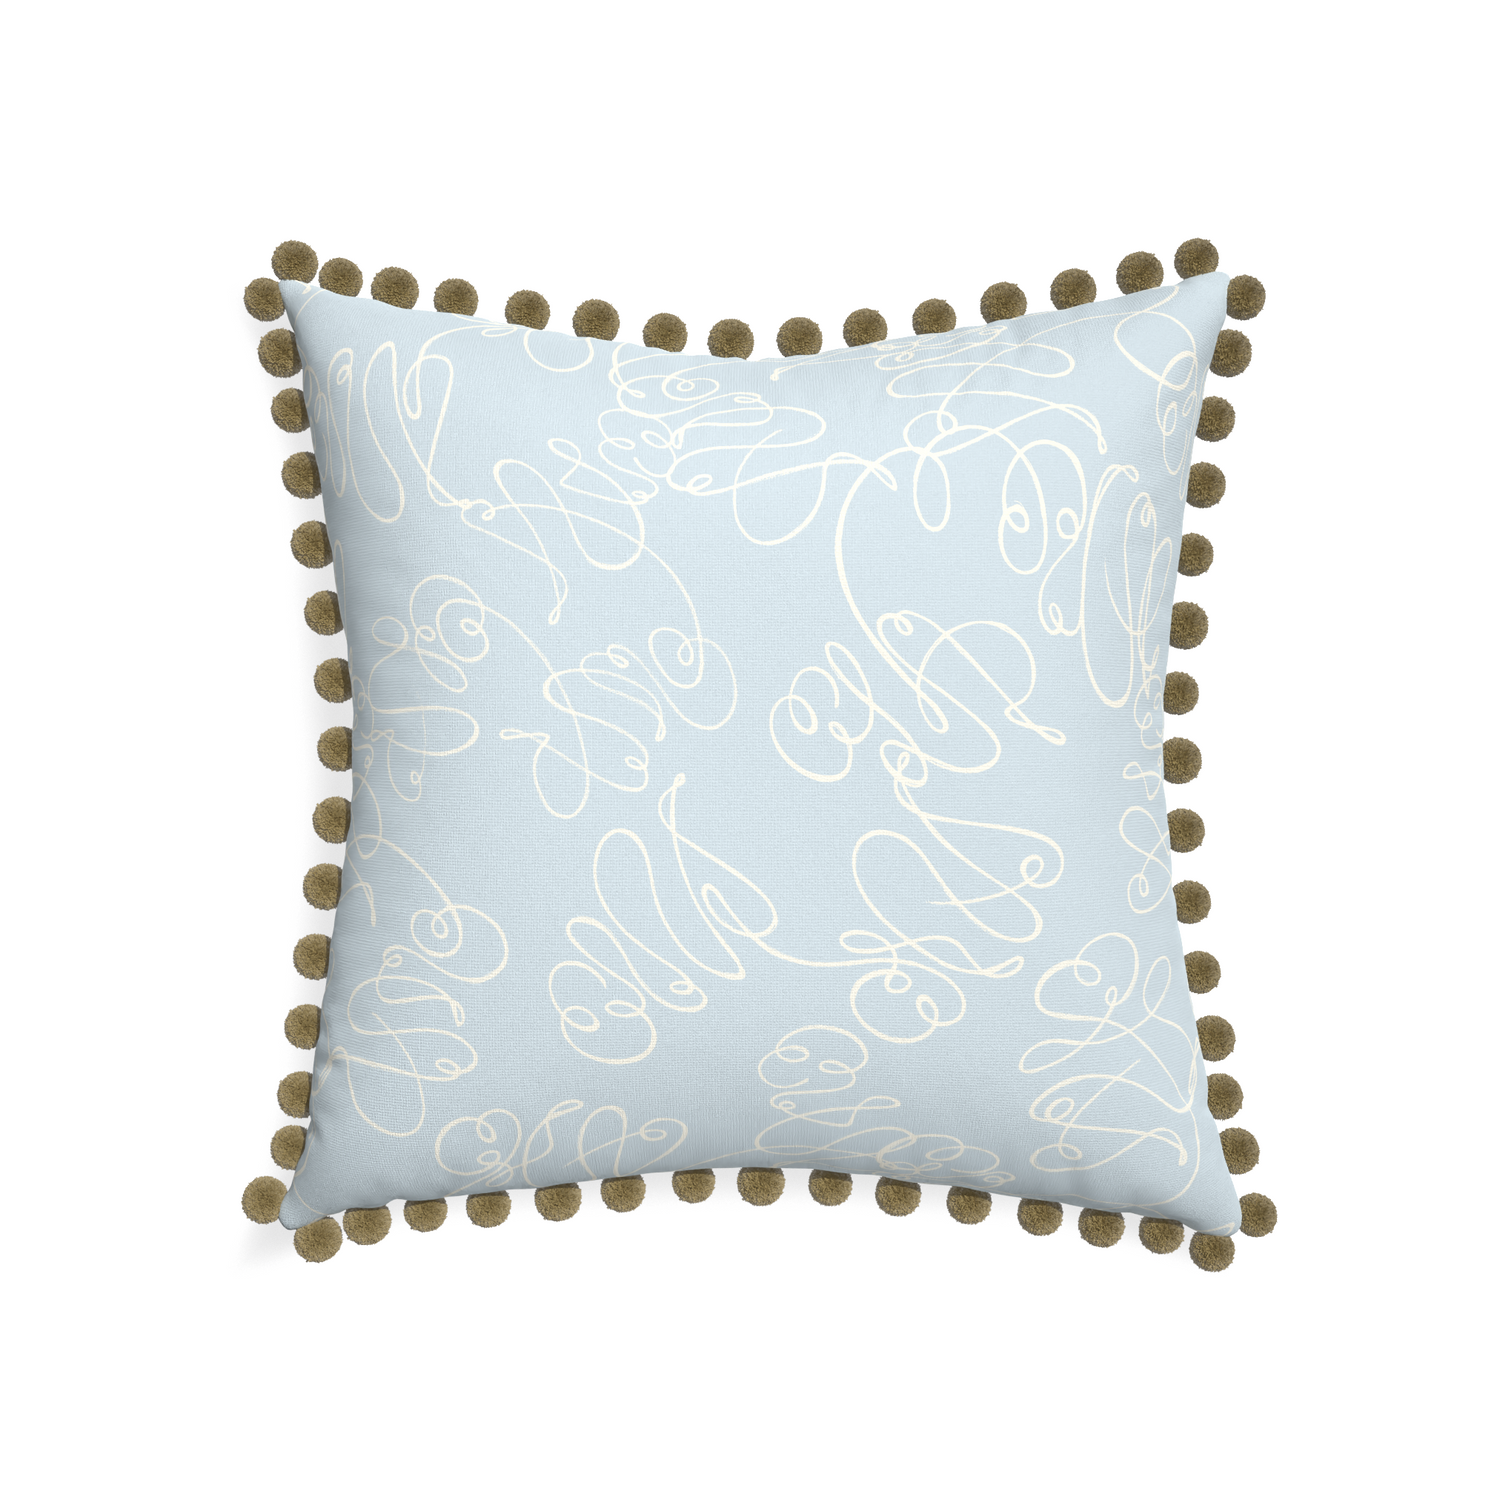 22-square mirabella custom powder blue abstractpillow with olive pom pom on white background